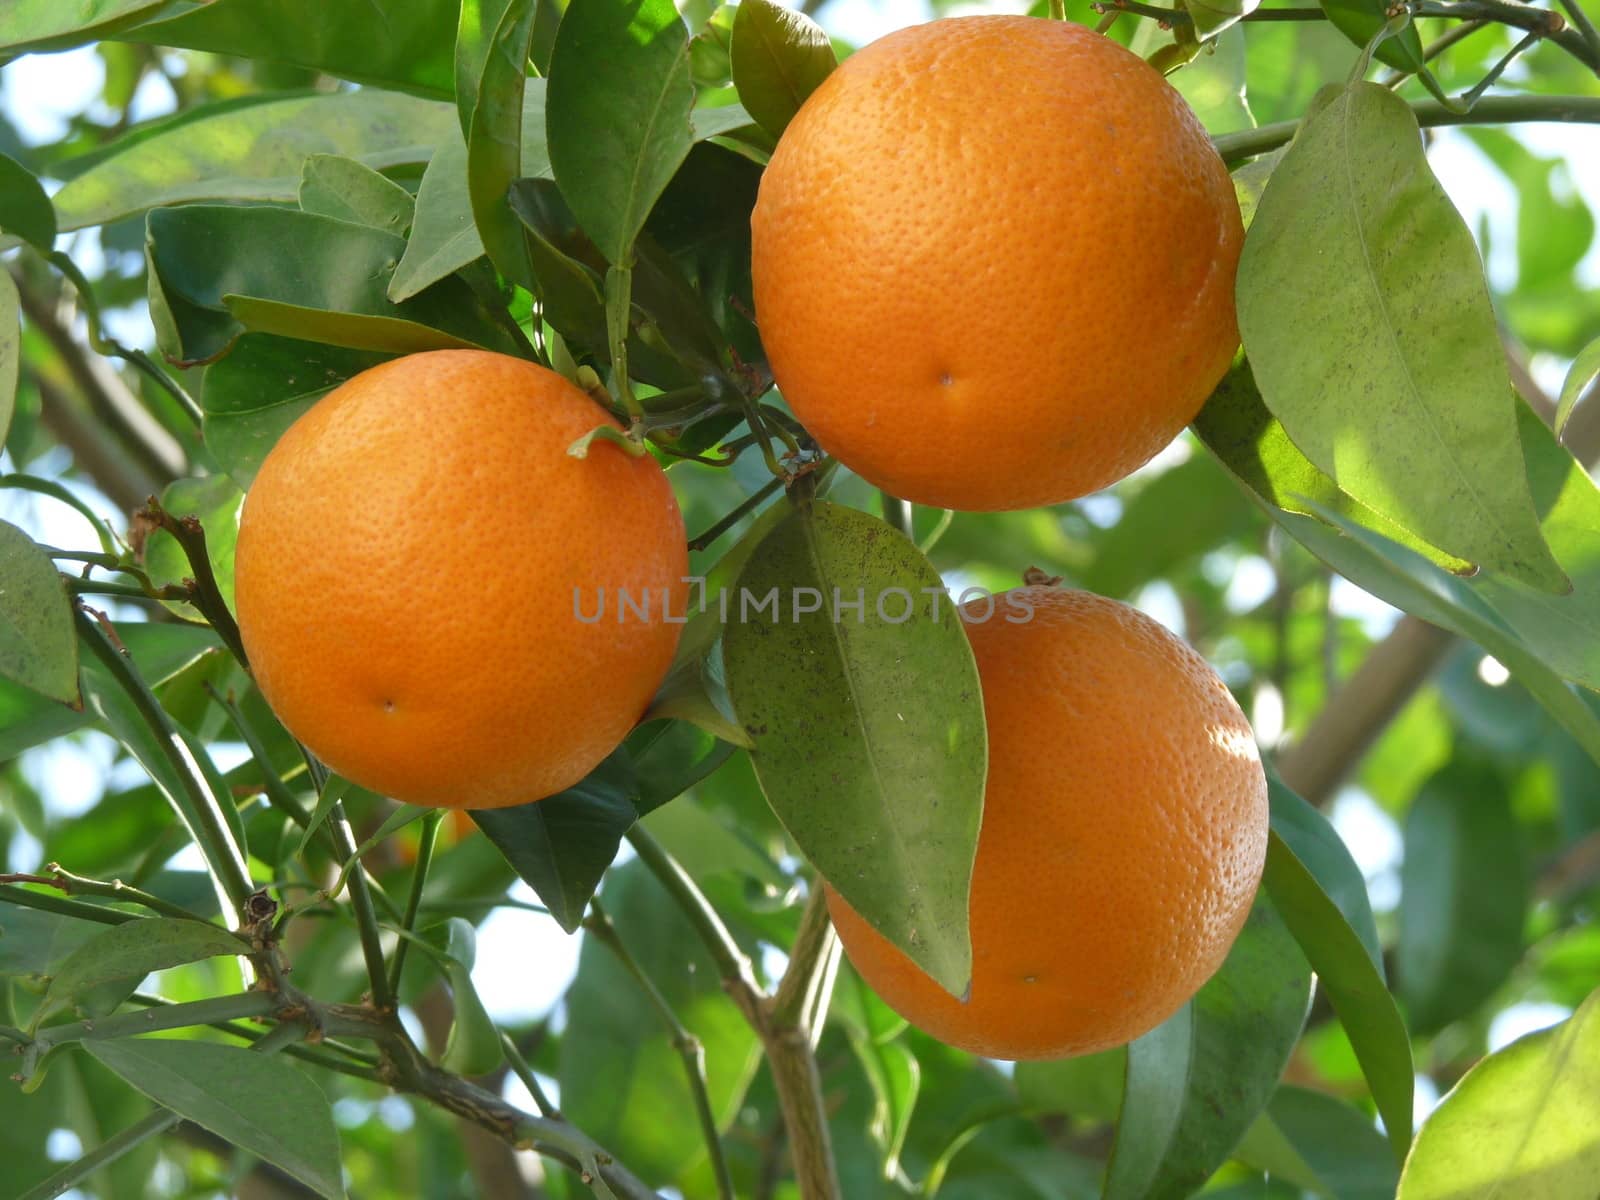 Three oranges from a tree, plant and equipment